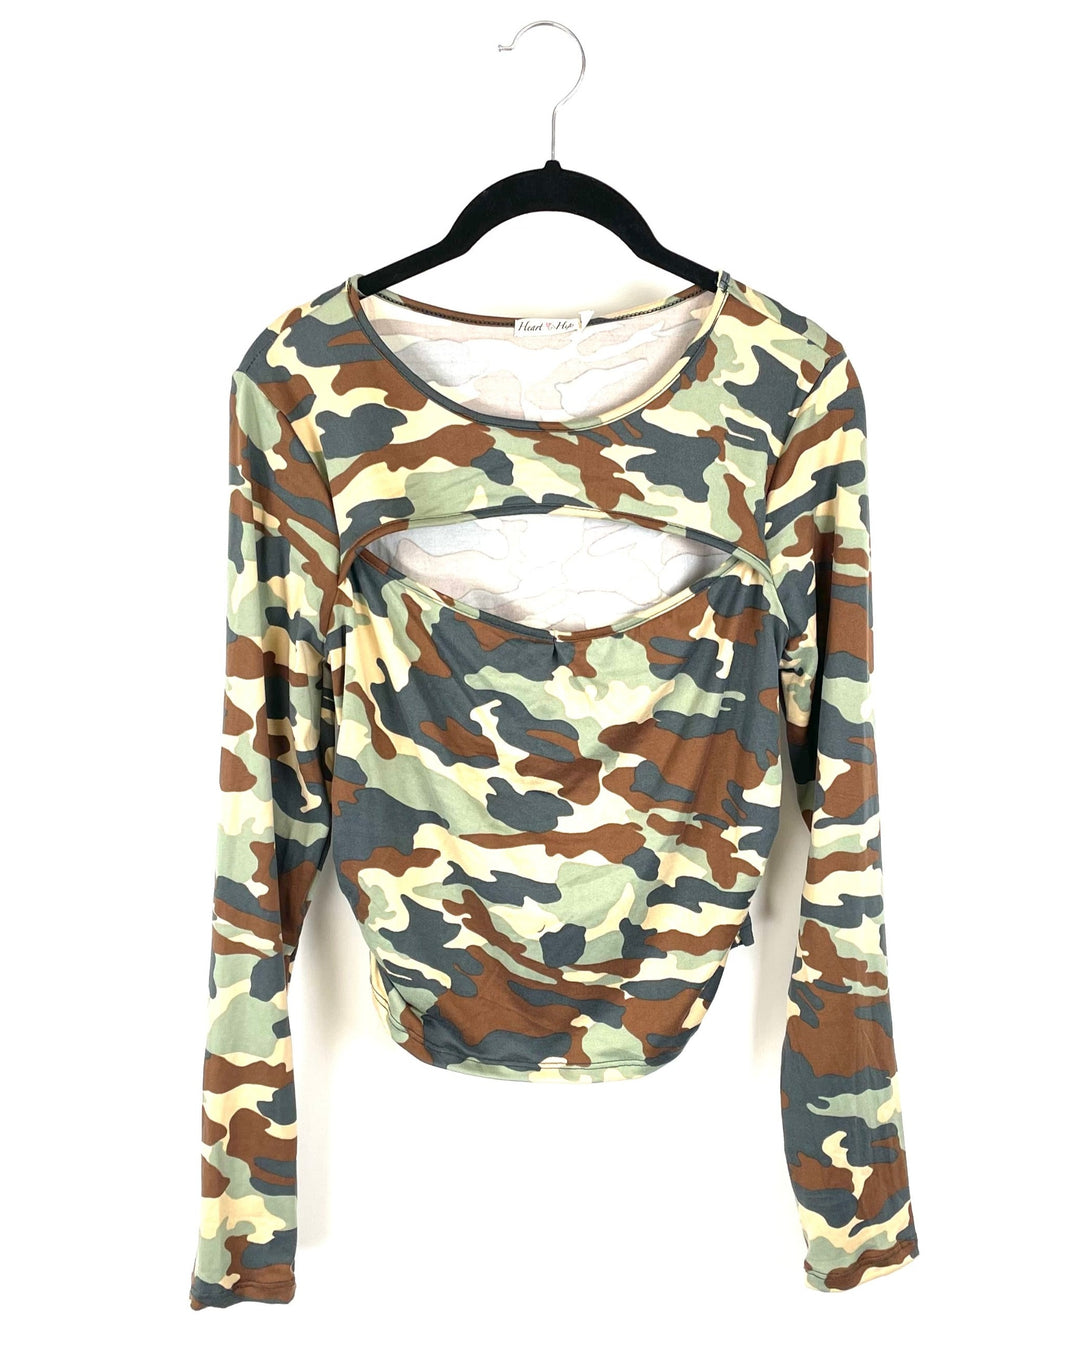 Camo Long Sleeve with Chest Cut Out - Small and Medium